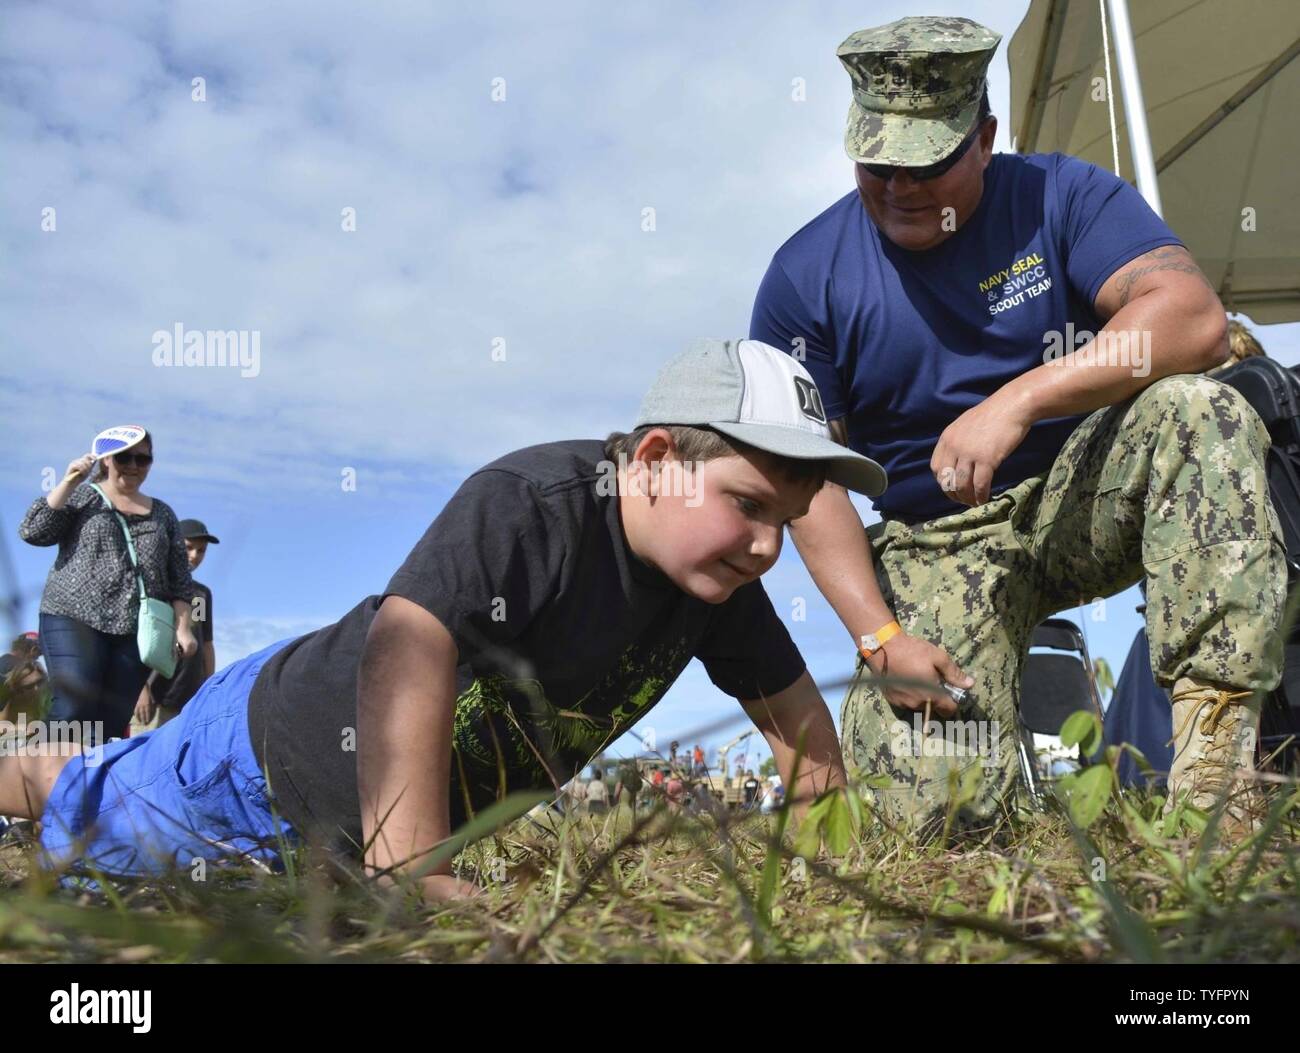 STUART, Fla. (Nov. 6, 2016) - Chief Petty Officer Joseph Schmidt, assigned to the Navy SEAL and SWCC Scout Team, encourages a young fan to do pushups at the 2016 Stuart AirShow. The Scout Team conducts outreach to community groups and athletic teams to inform them about the Naval Special Warfare training mission. Stock Photo